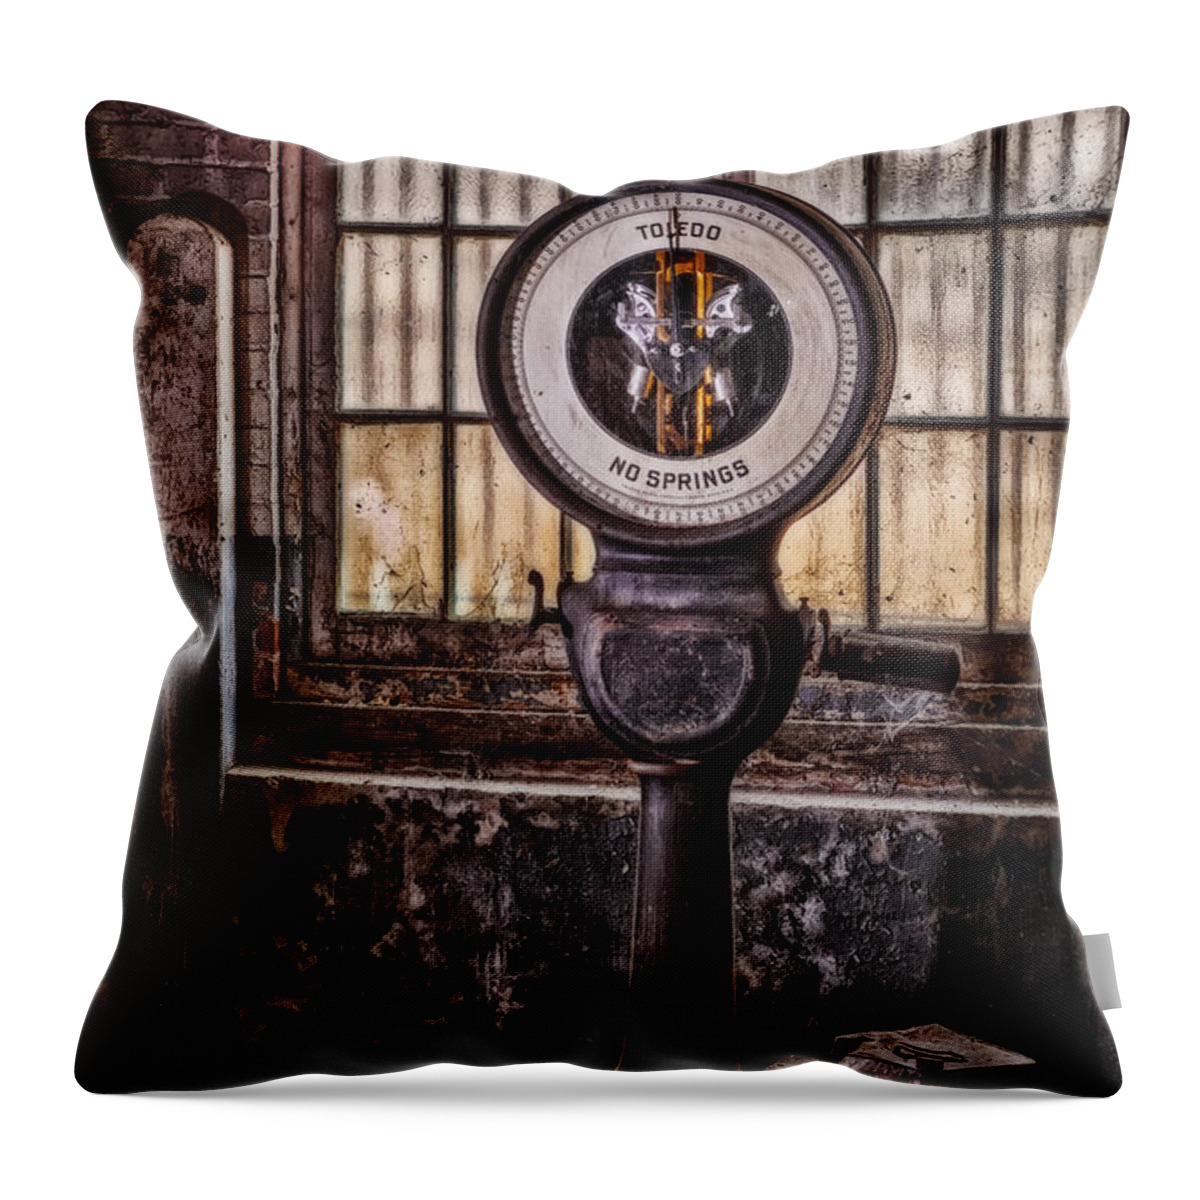 Toledo No Springs Scale Throw Pillow featuring the photograph Toledo No Springs Scale by Susan Candelario